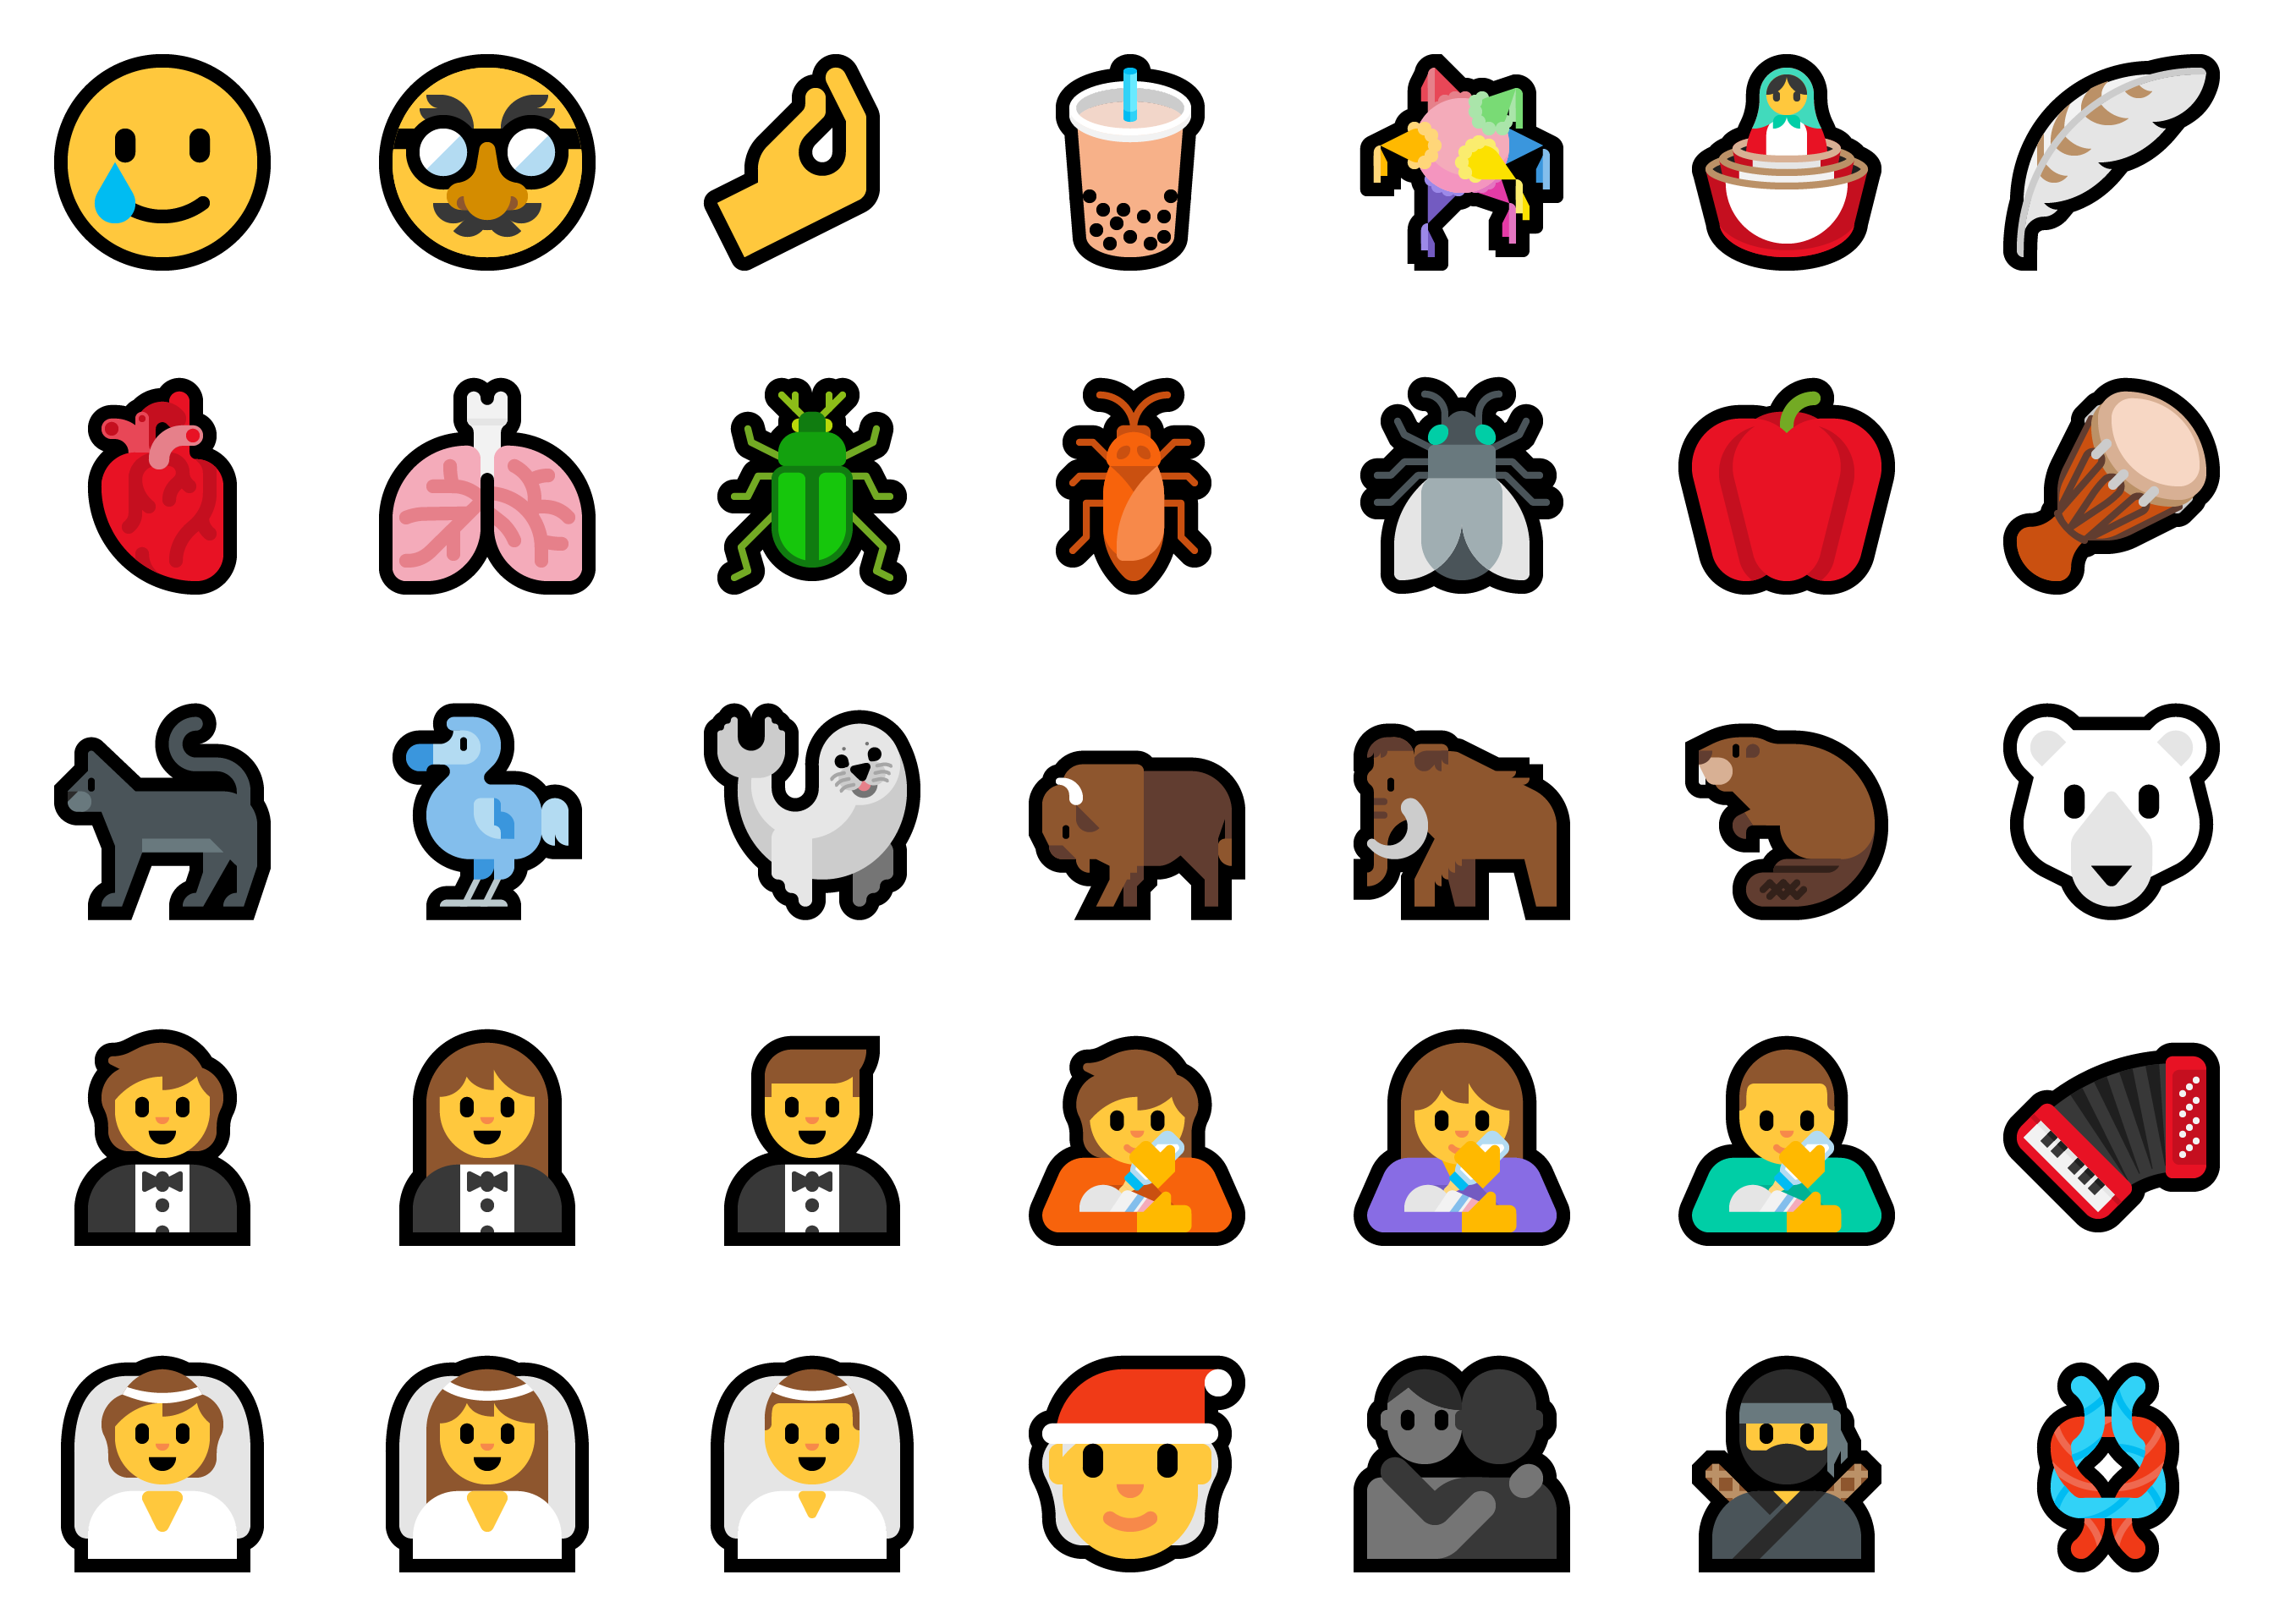 Example of new emoji with Unicode 13 in Windows 10 (21H1)